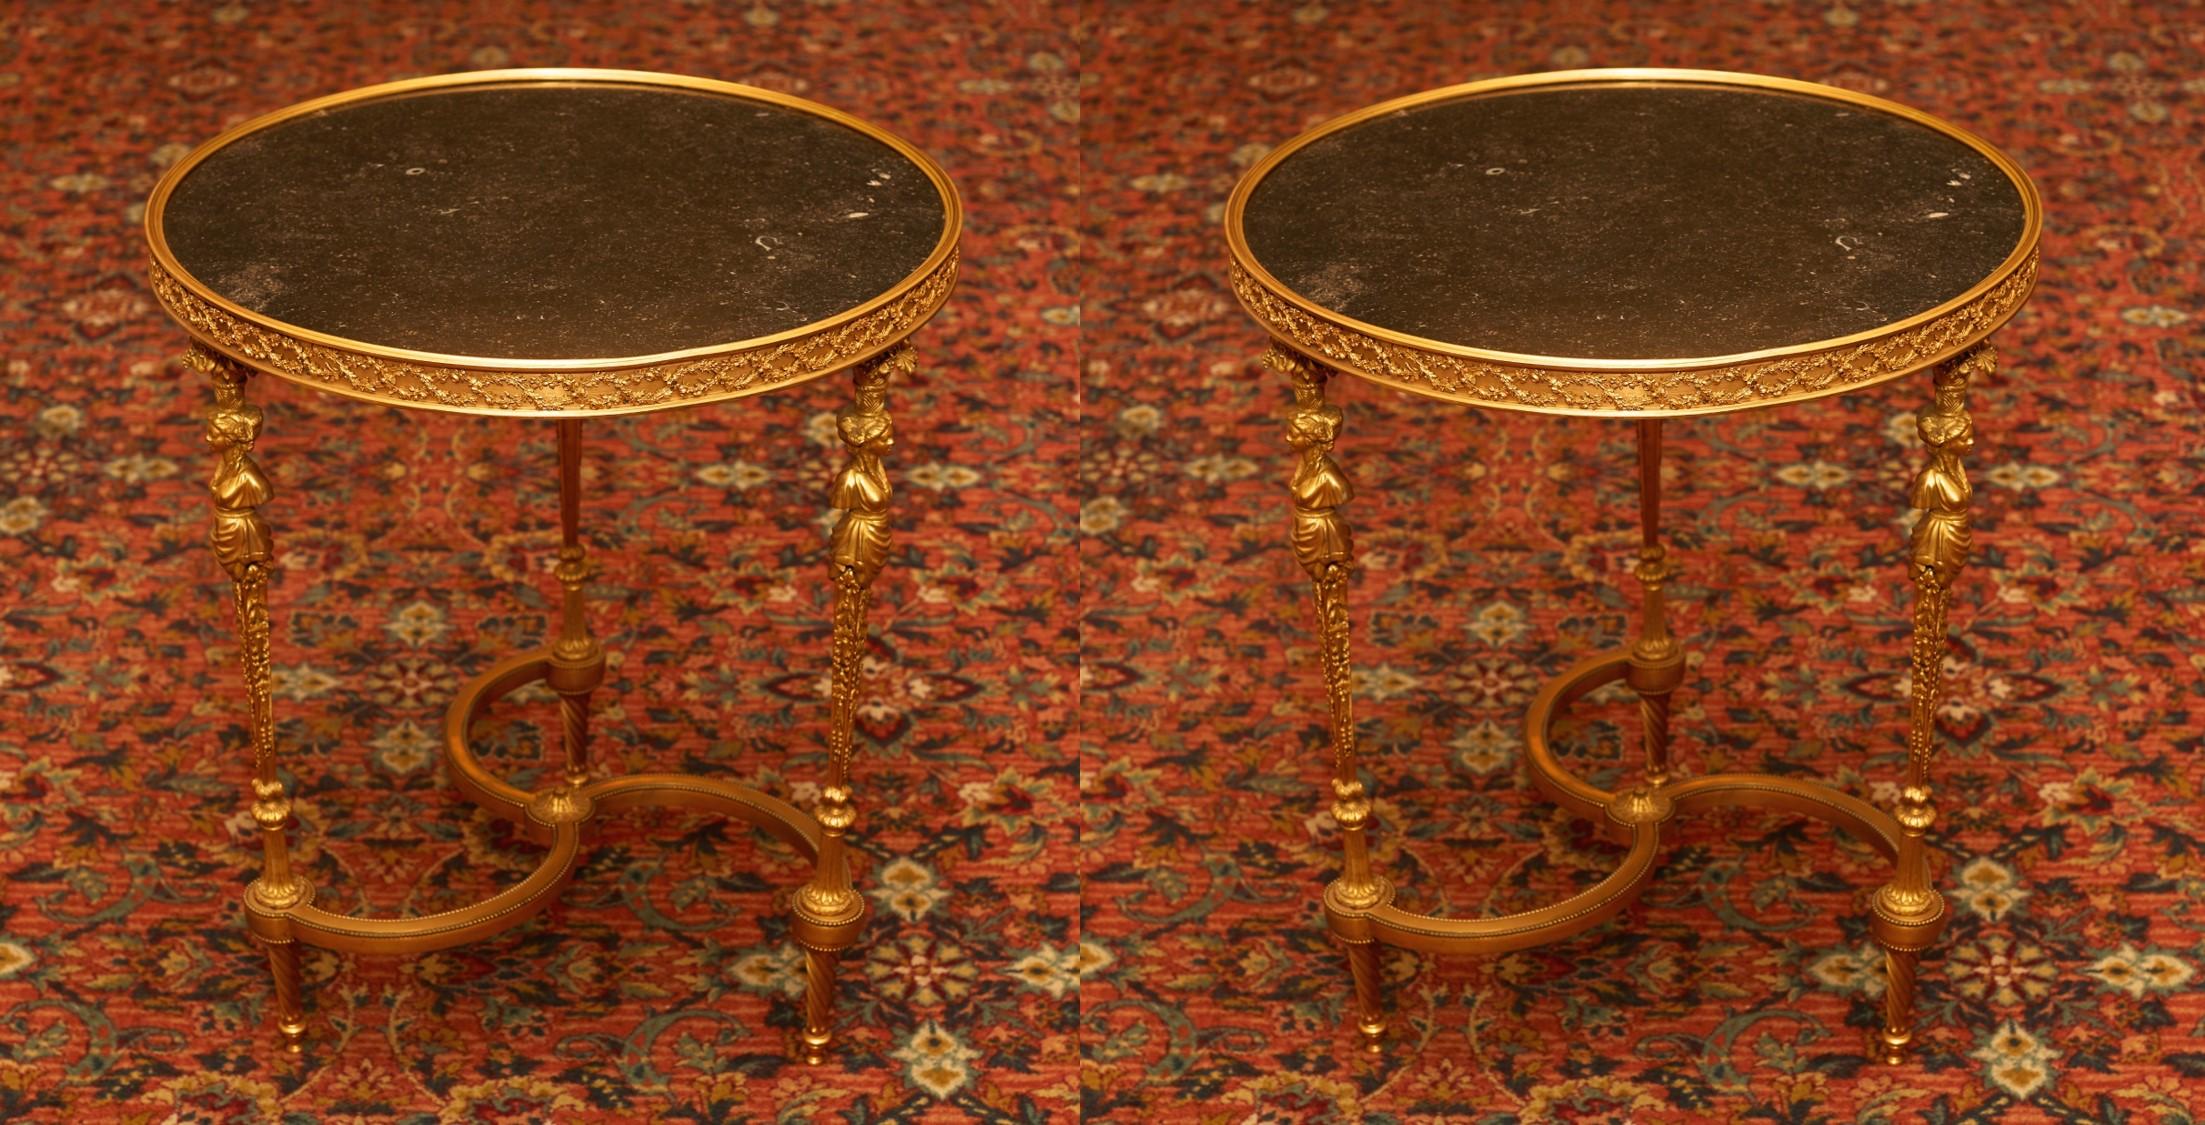 French Louis XVI Style Gilt Bronze & Black Marble Gueridons after Adam Weisweiler, Pair